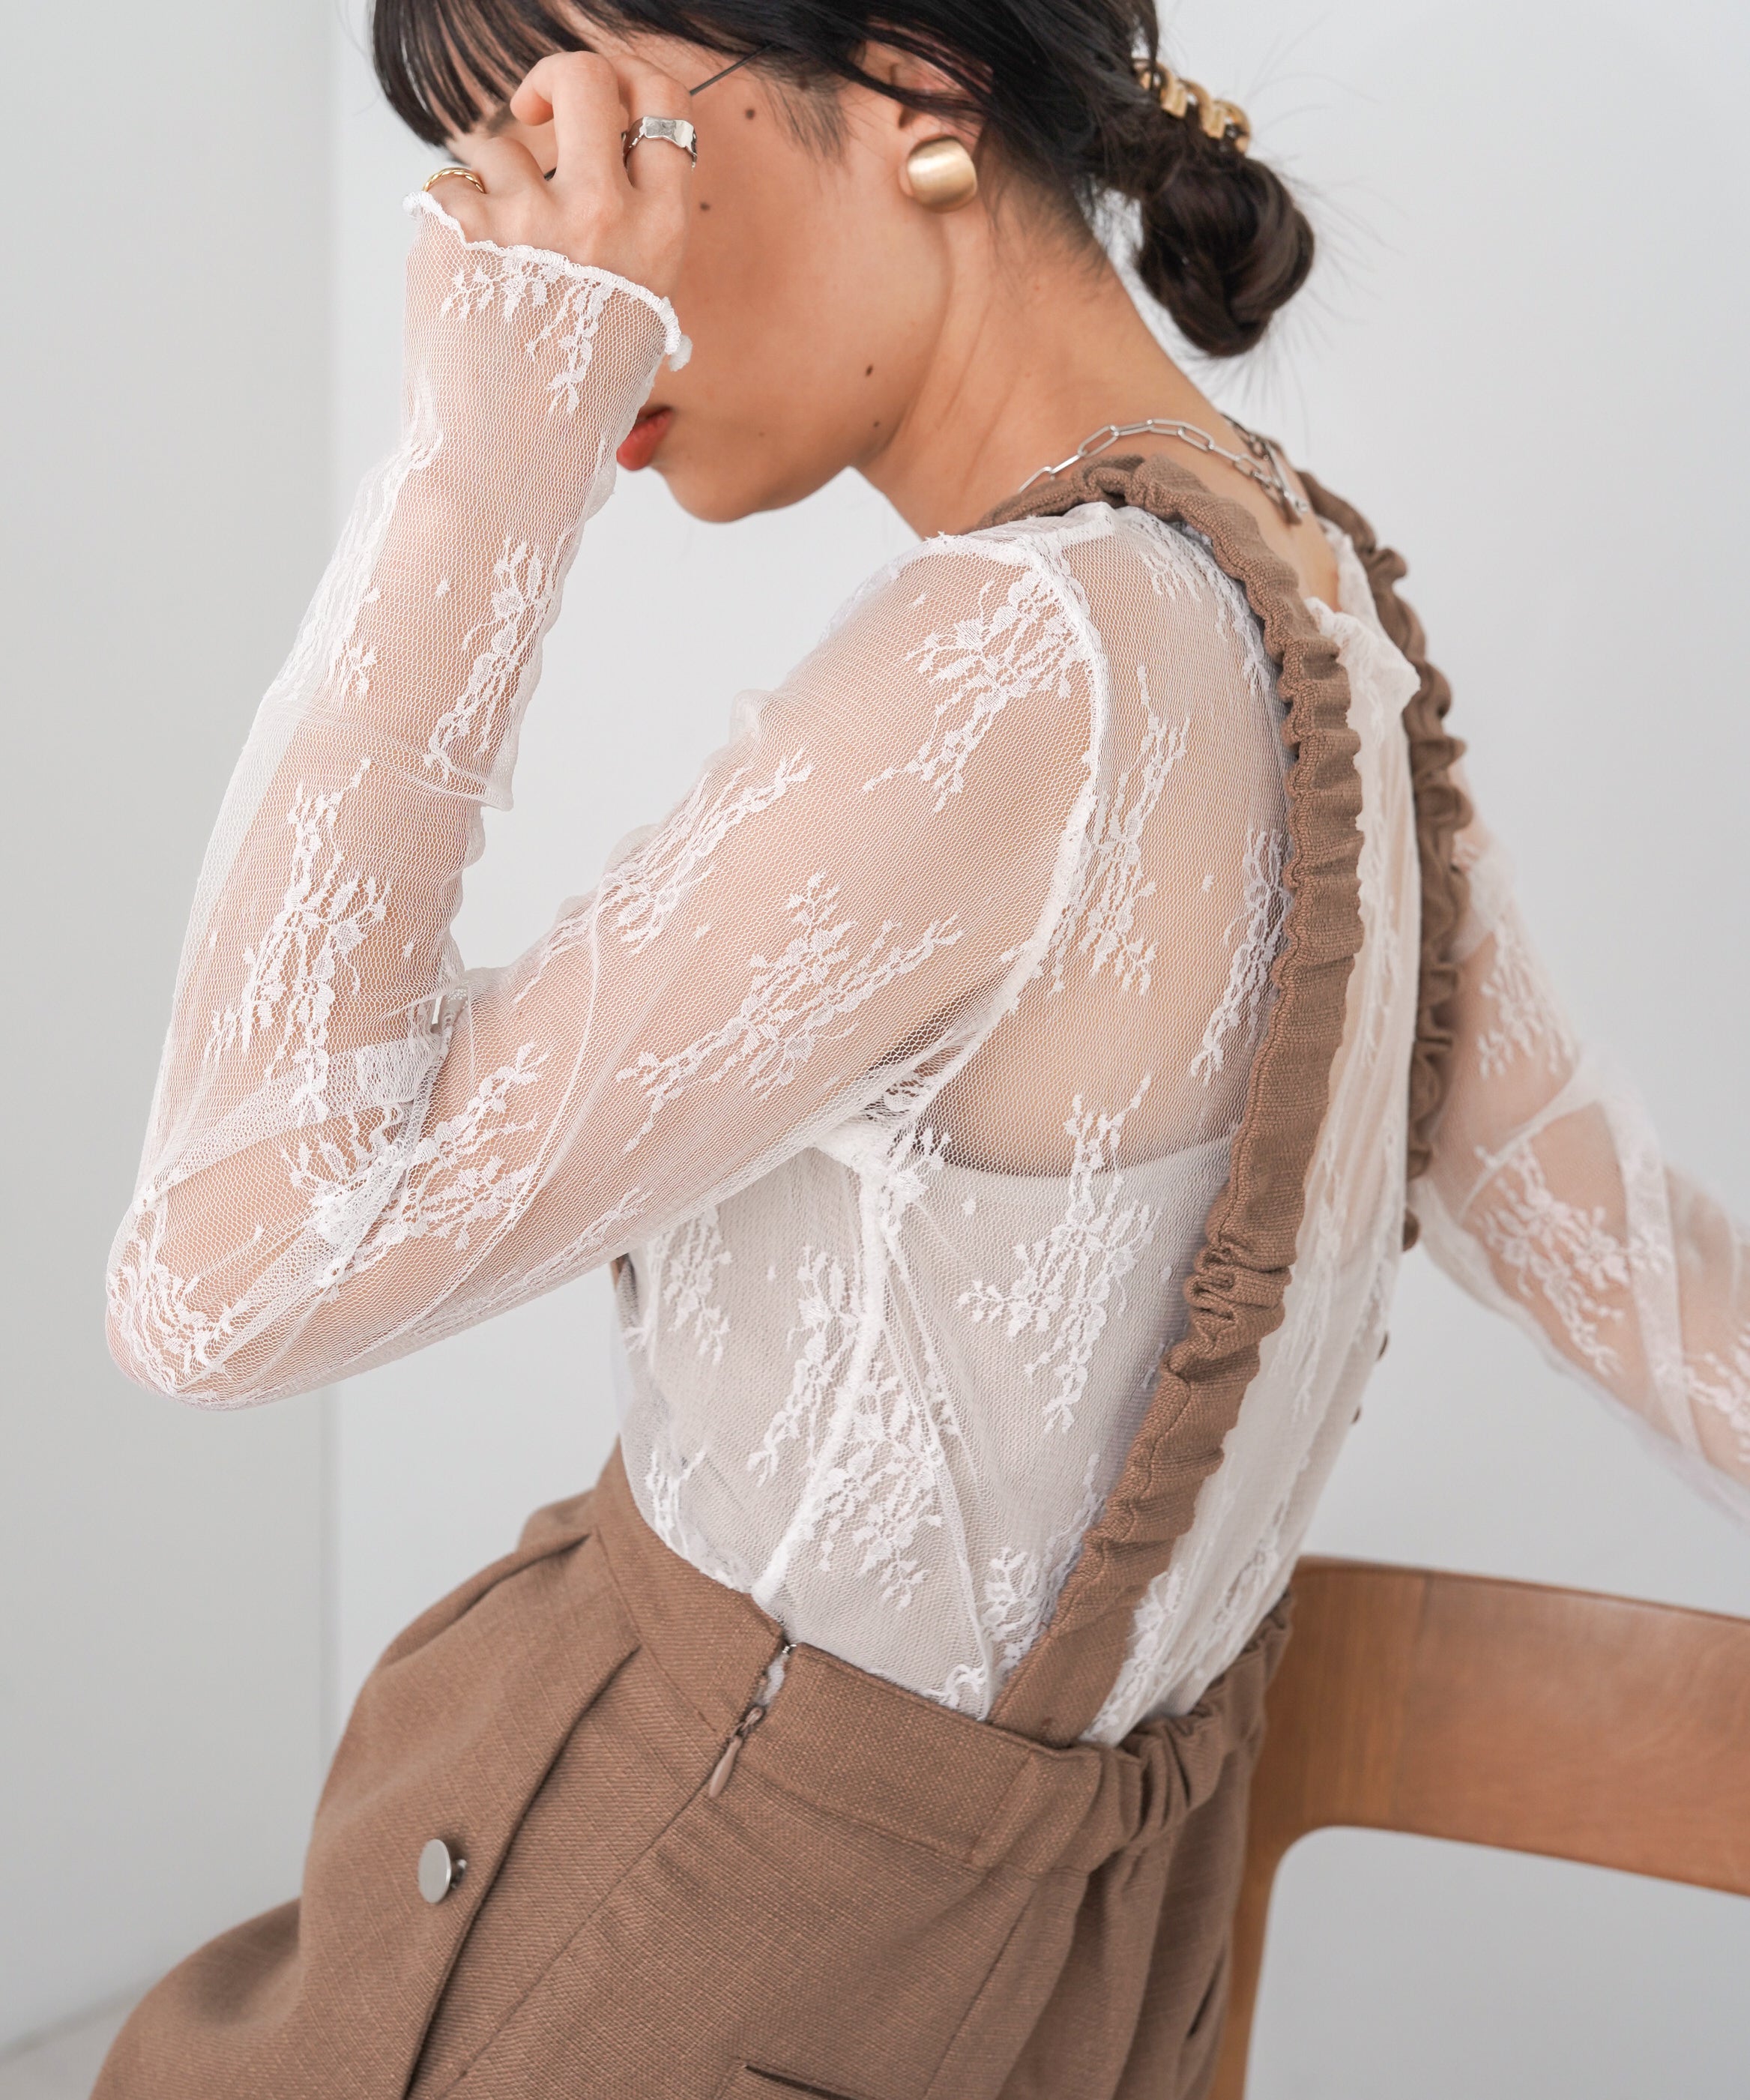 LACE SHEER INNER TOPS – Bab